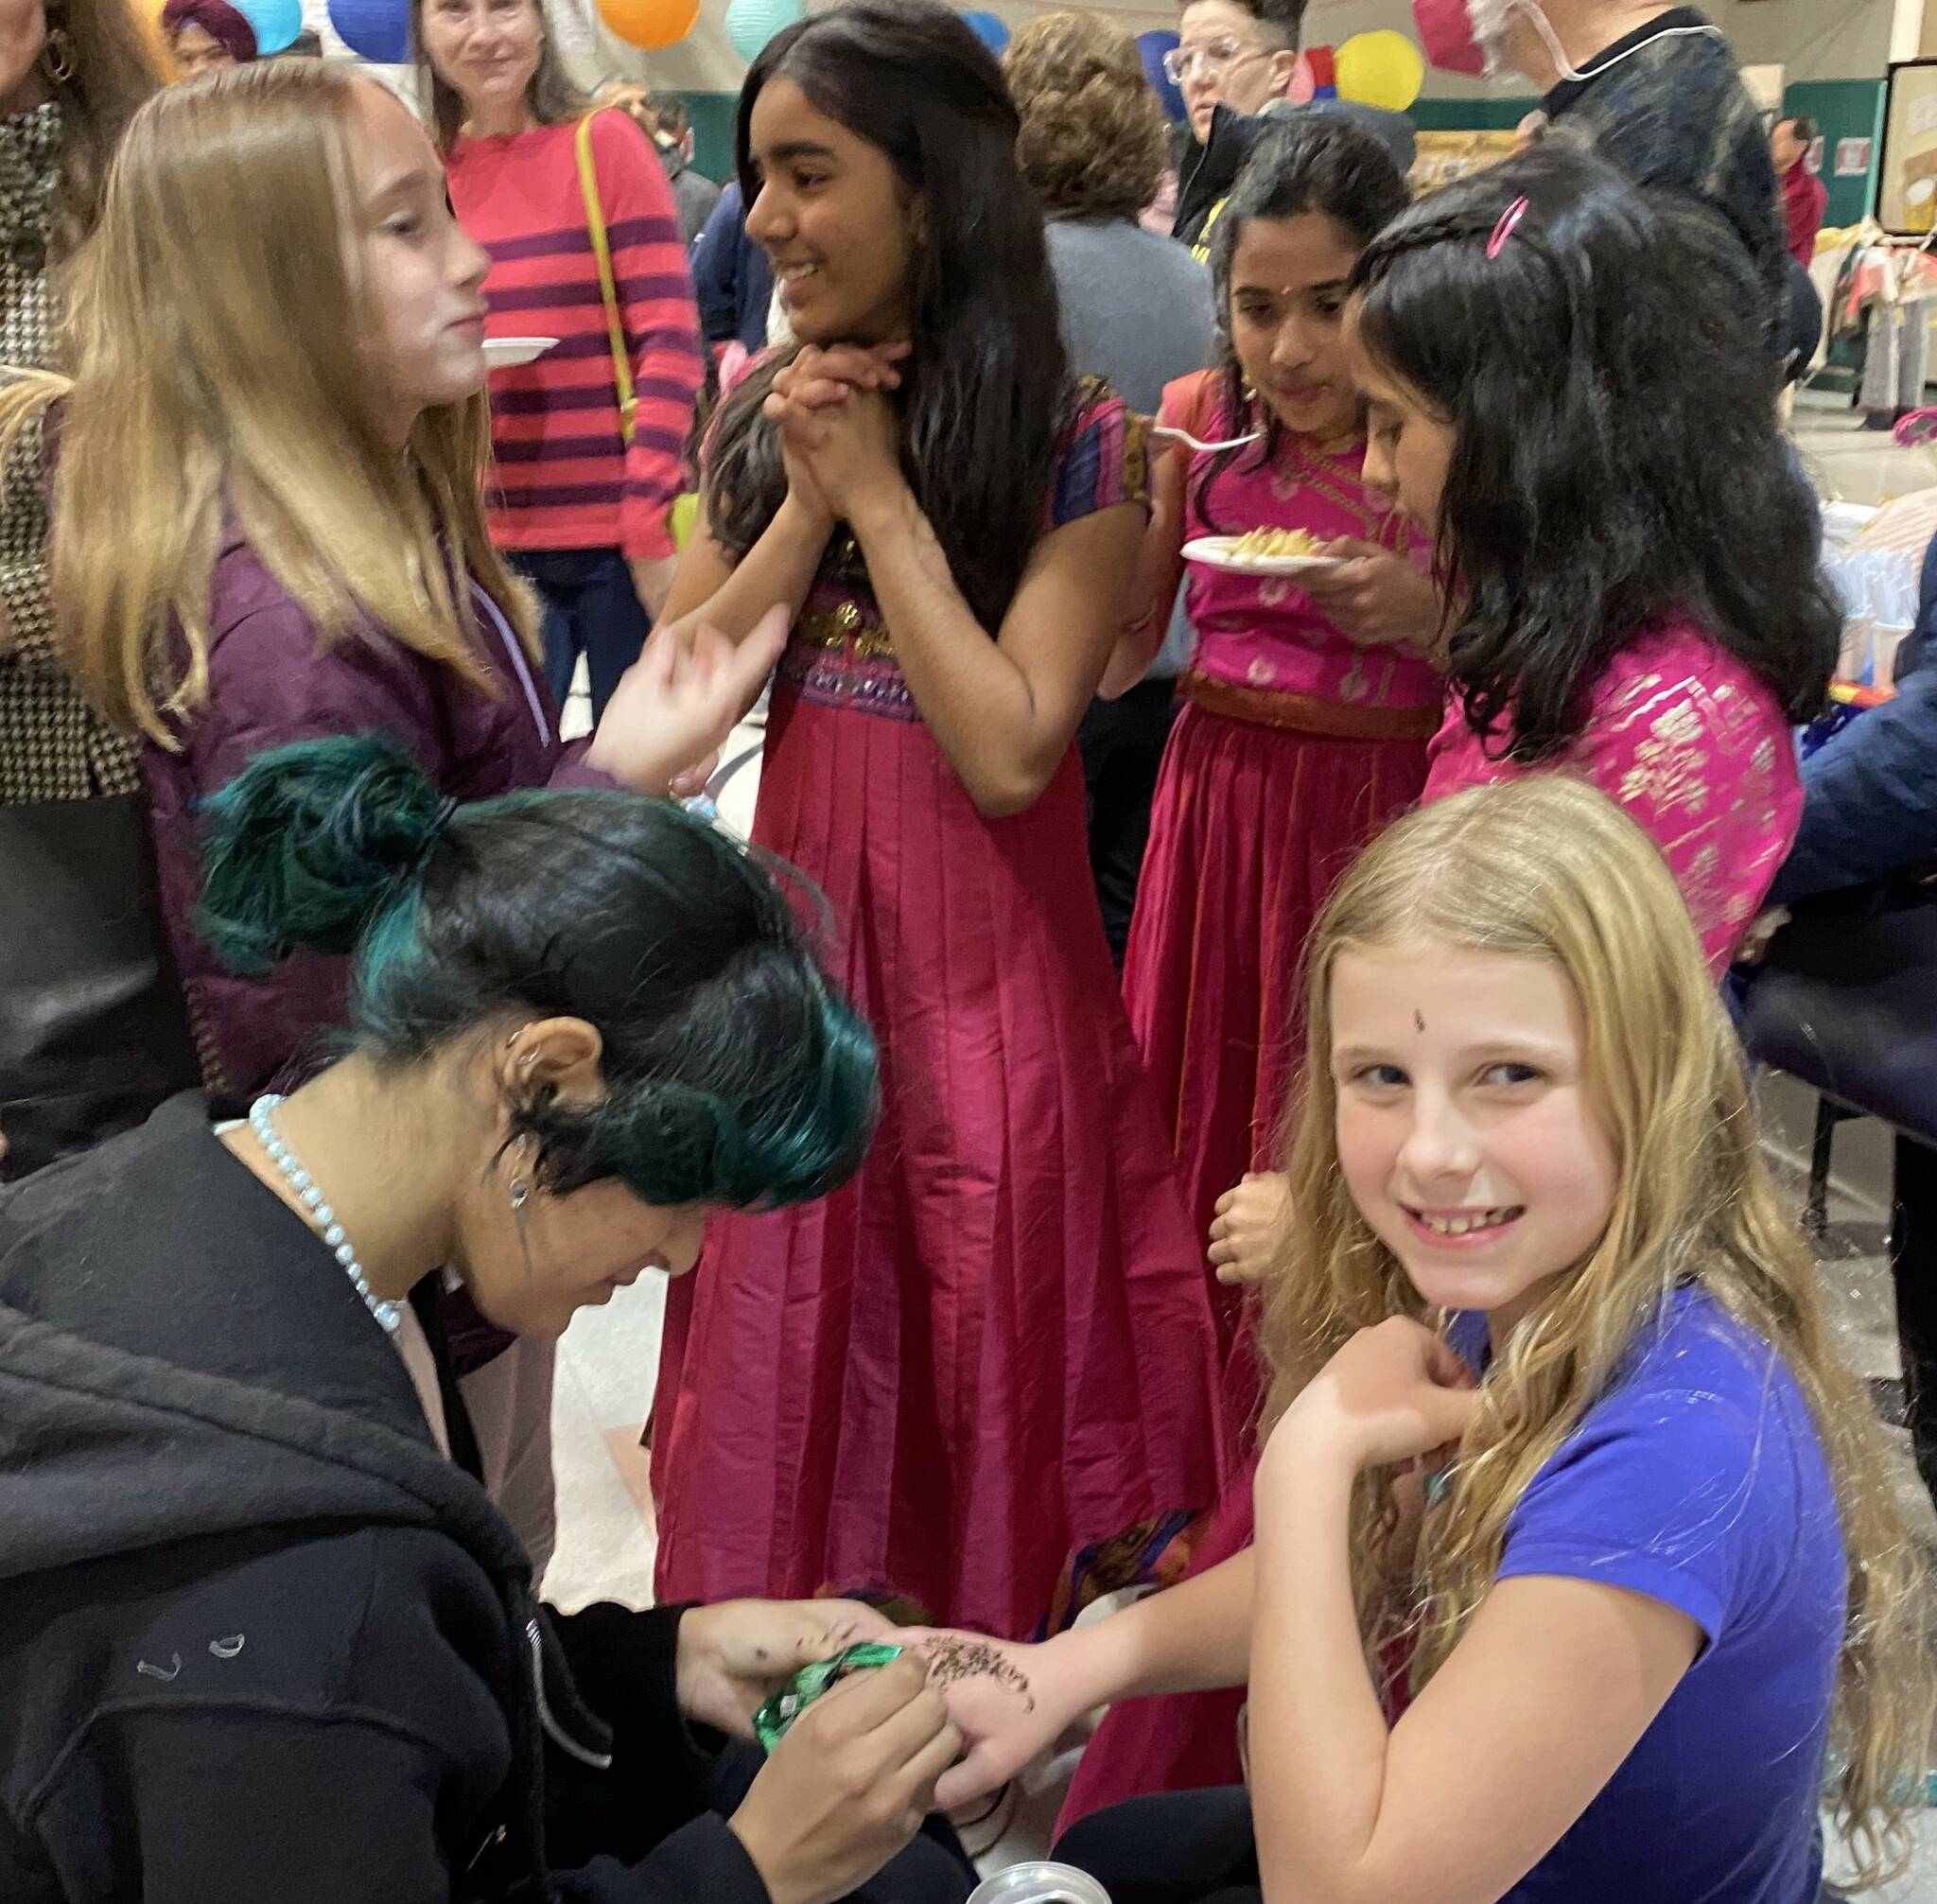 Students enjoy the event, which included a visit with a mehndi/henna artist. (Photos courtesy of Soyun Chow)